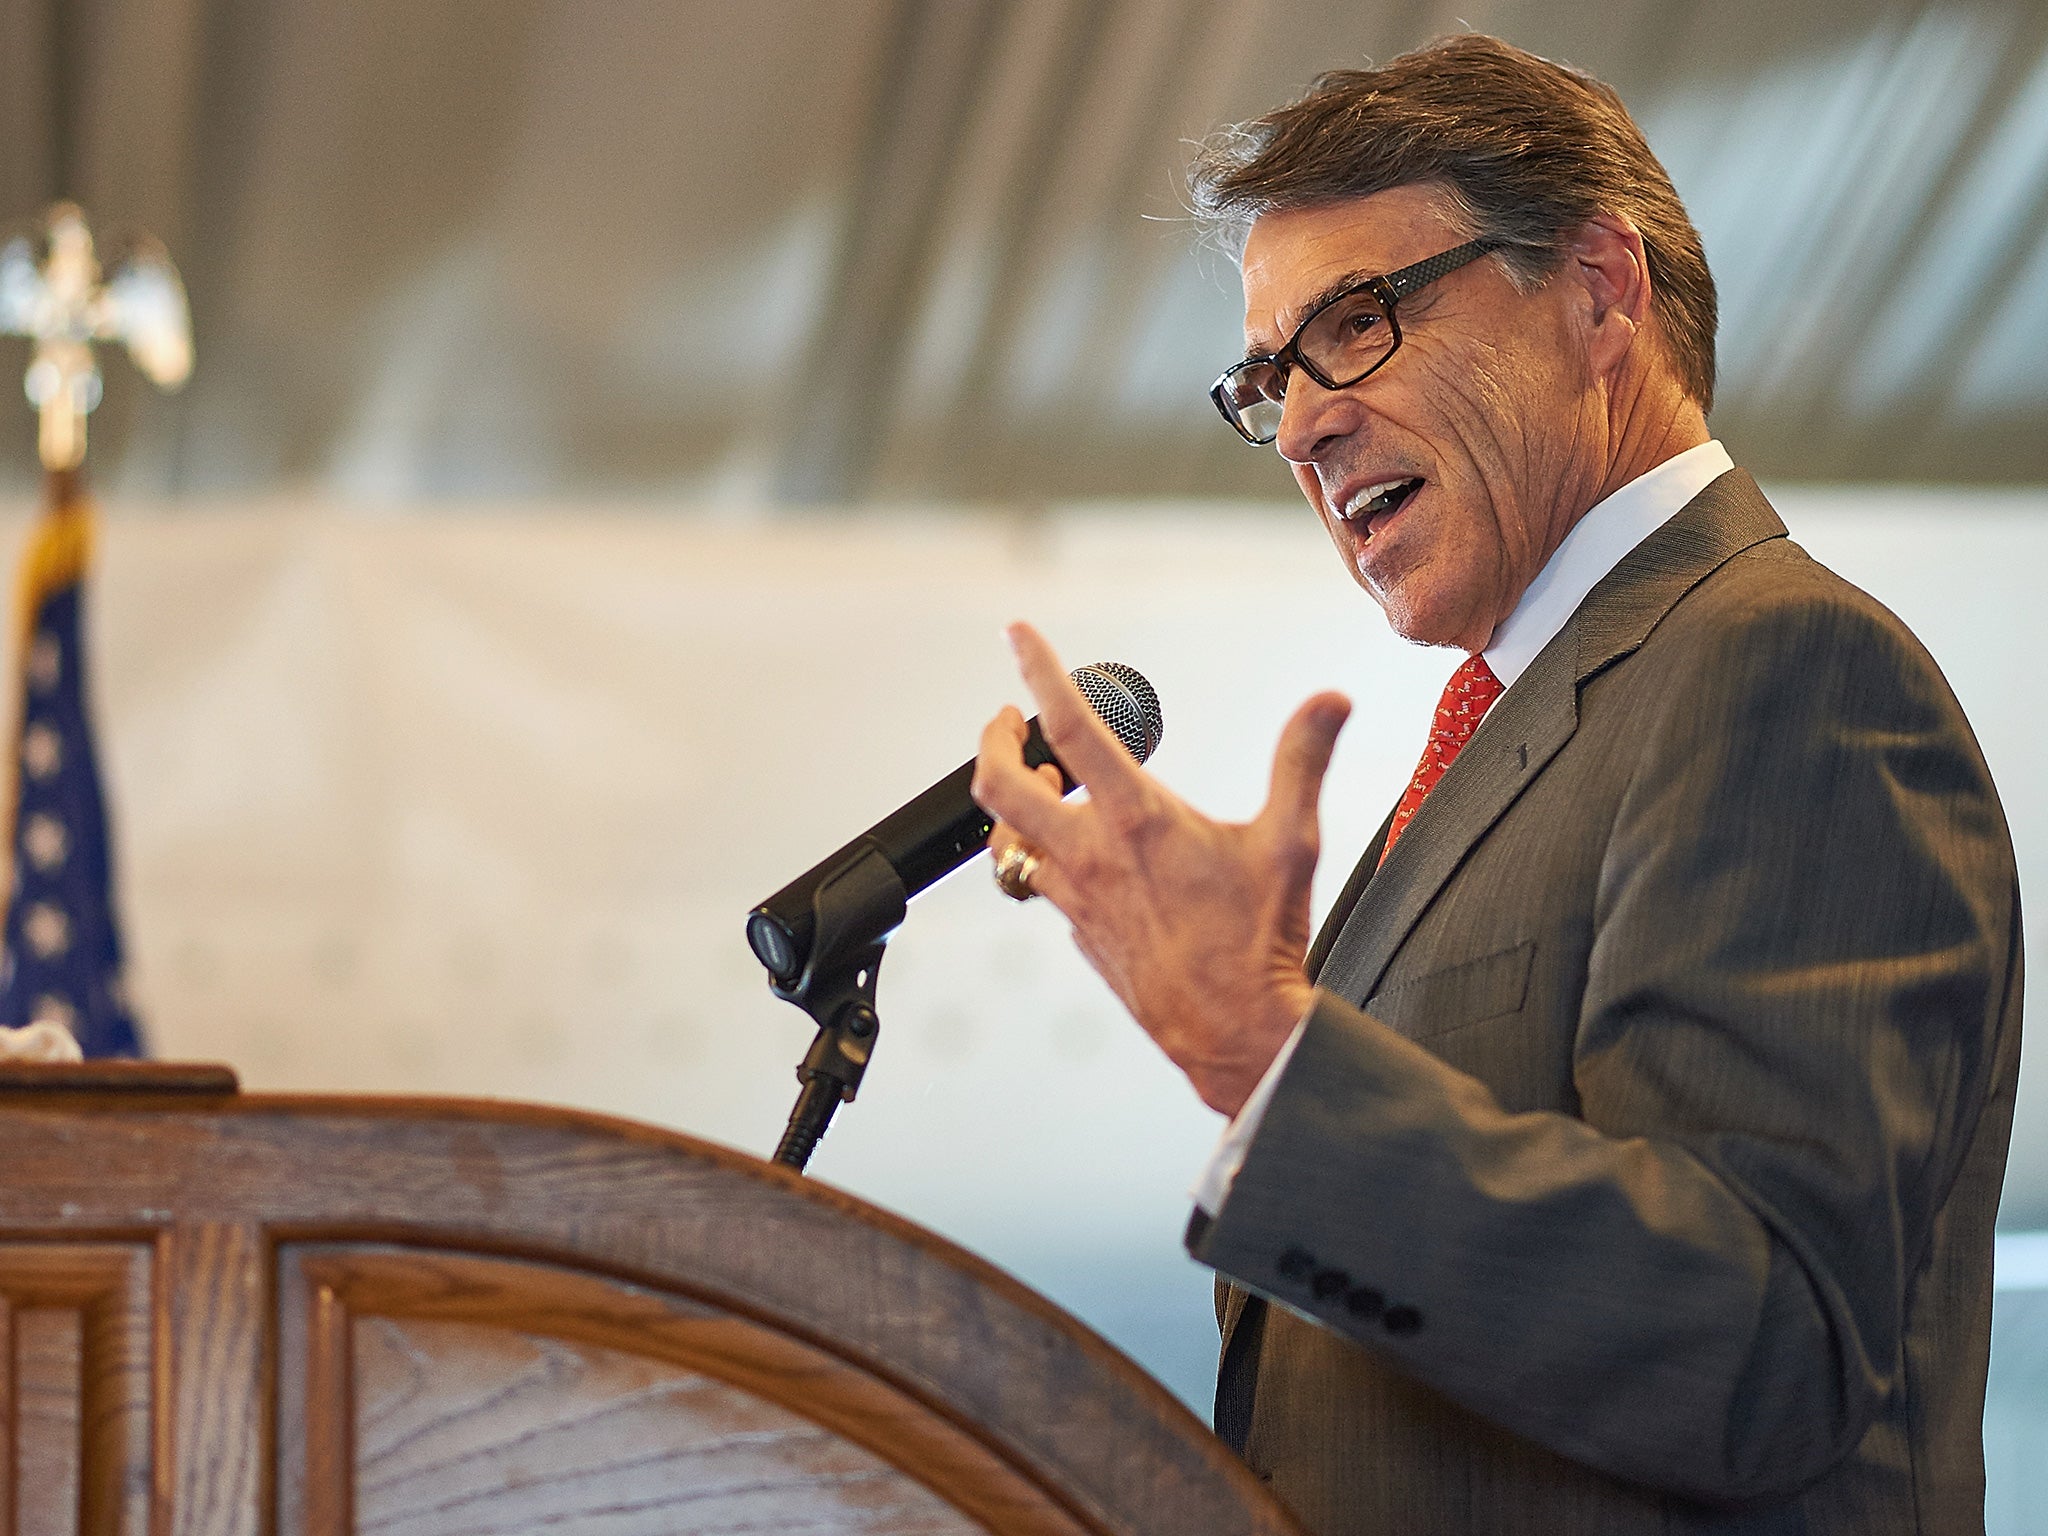 Rick Perry briefly led the presidential polls in 2012